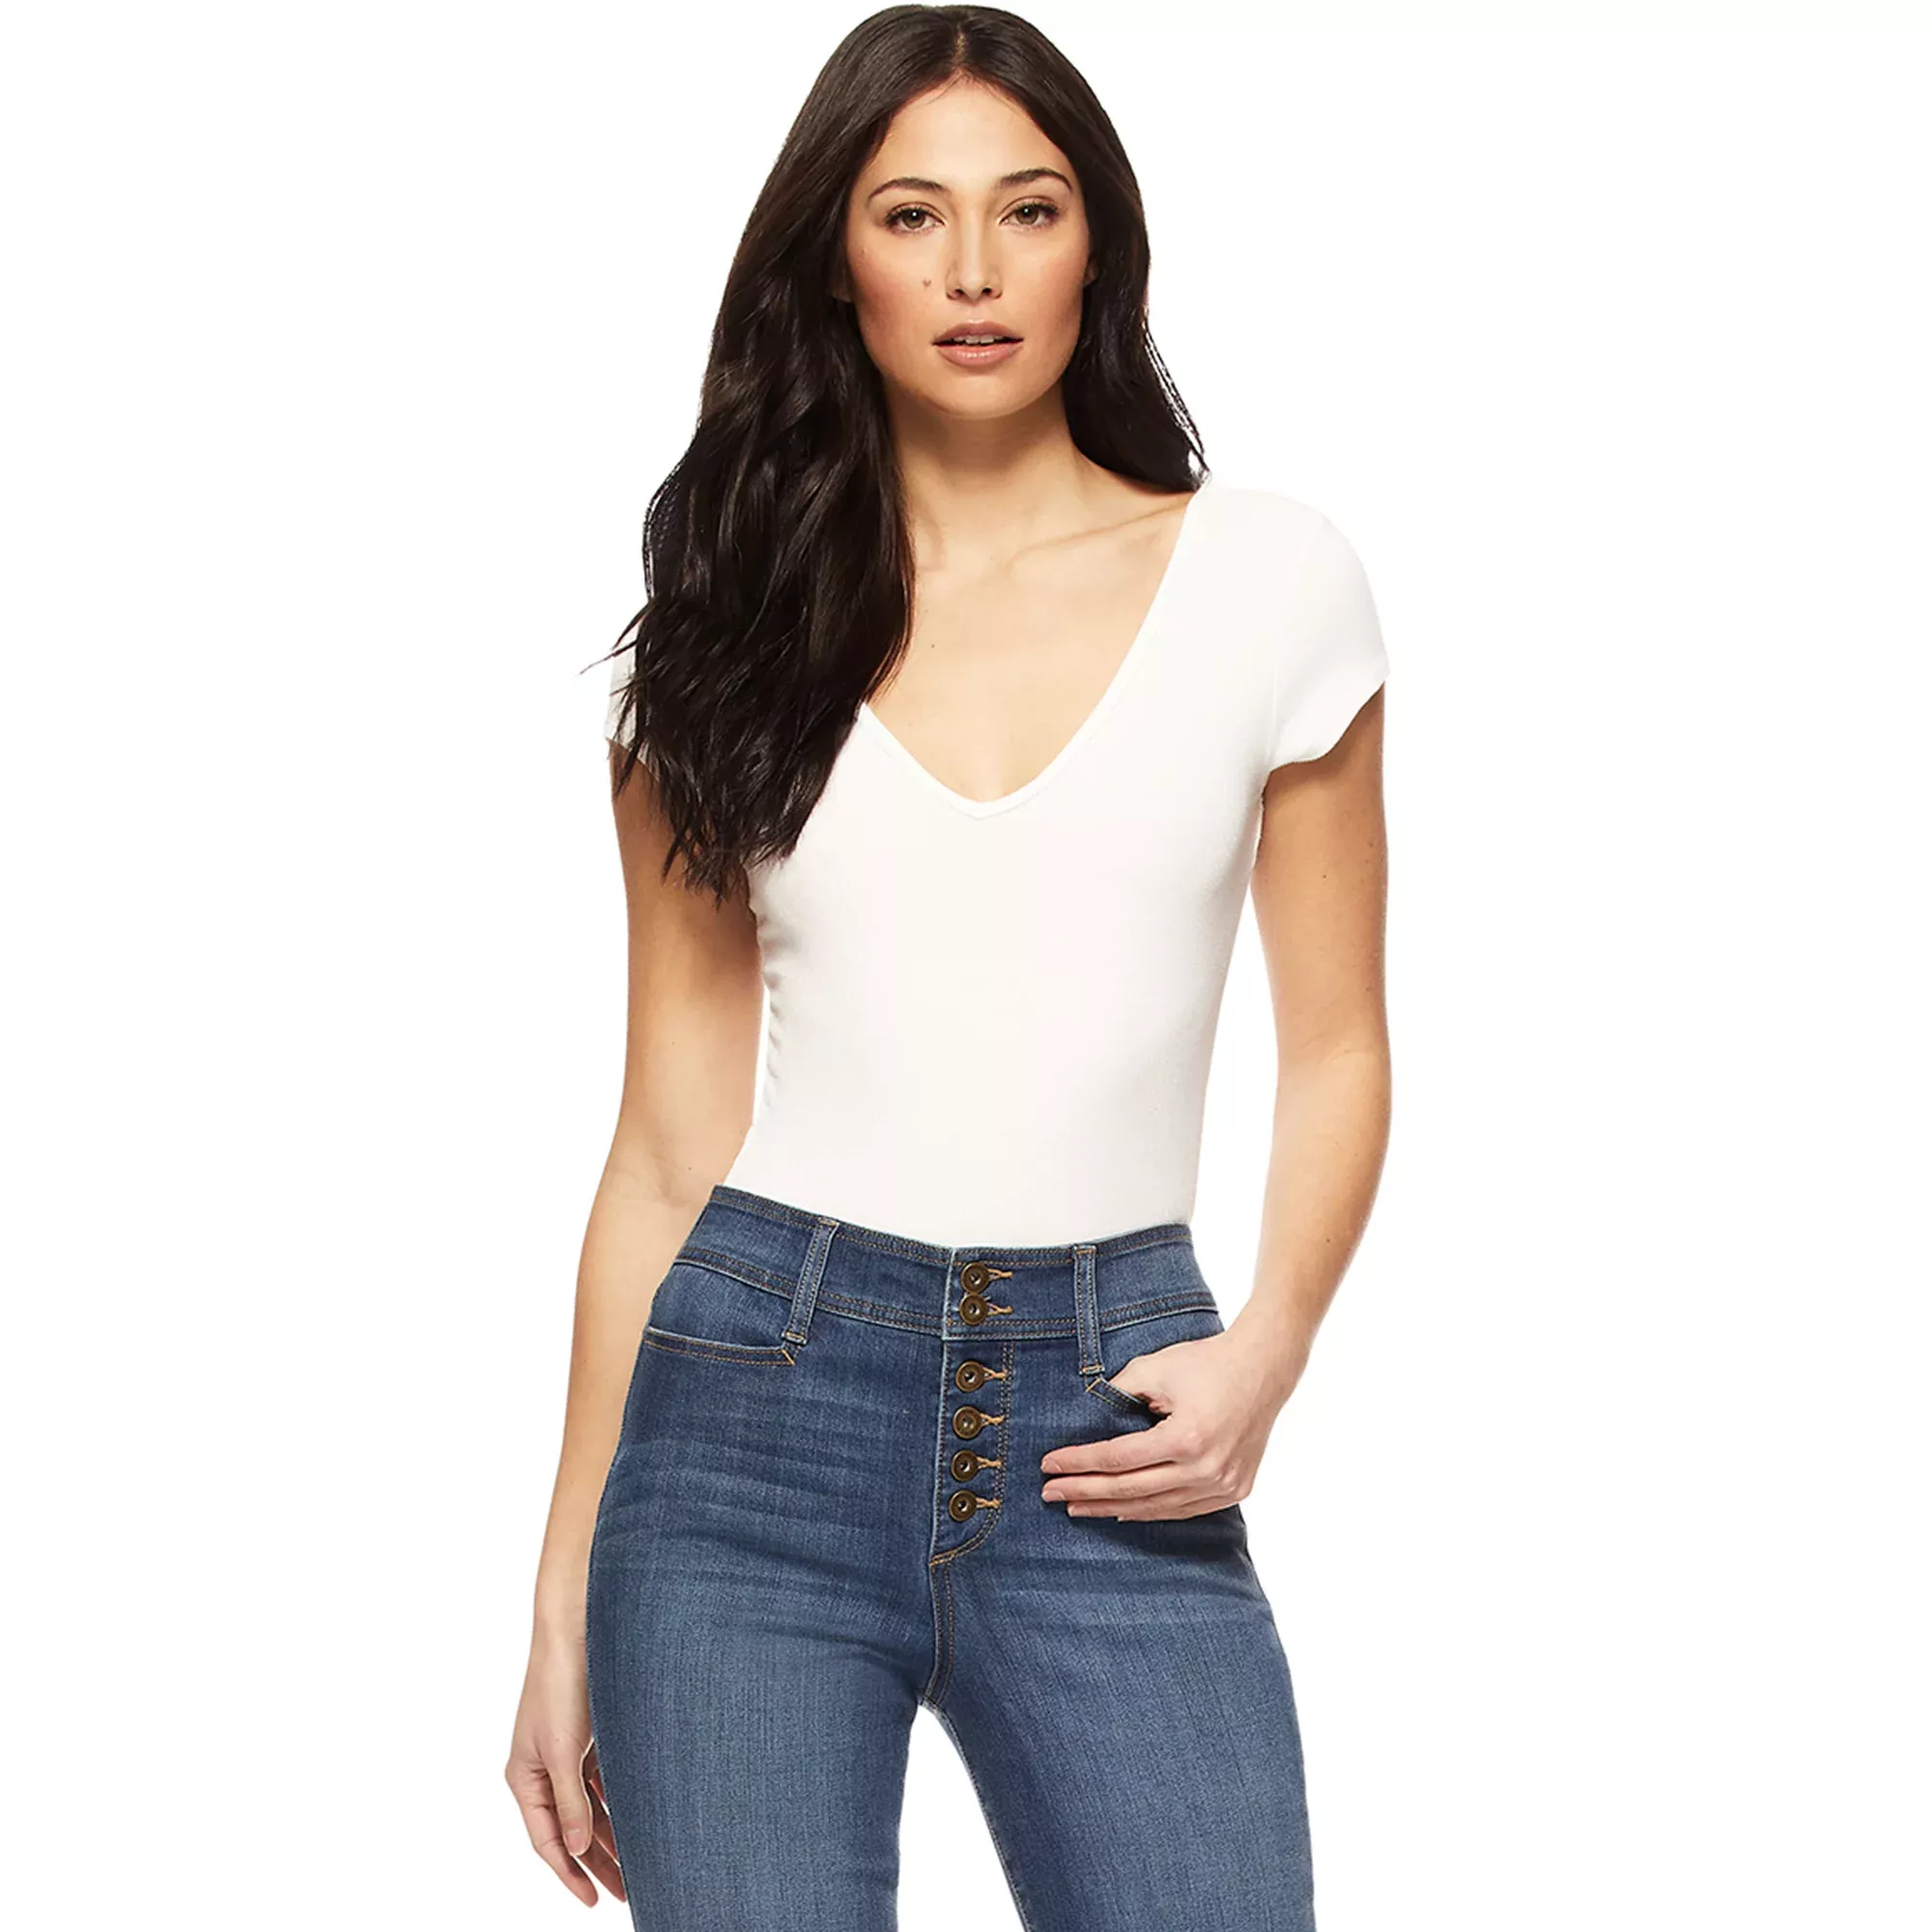 Sofia Vergara Jeans from Walmart with Try On, Free Assembly, Scoop